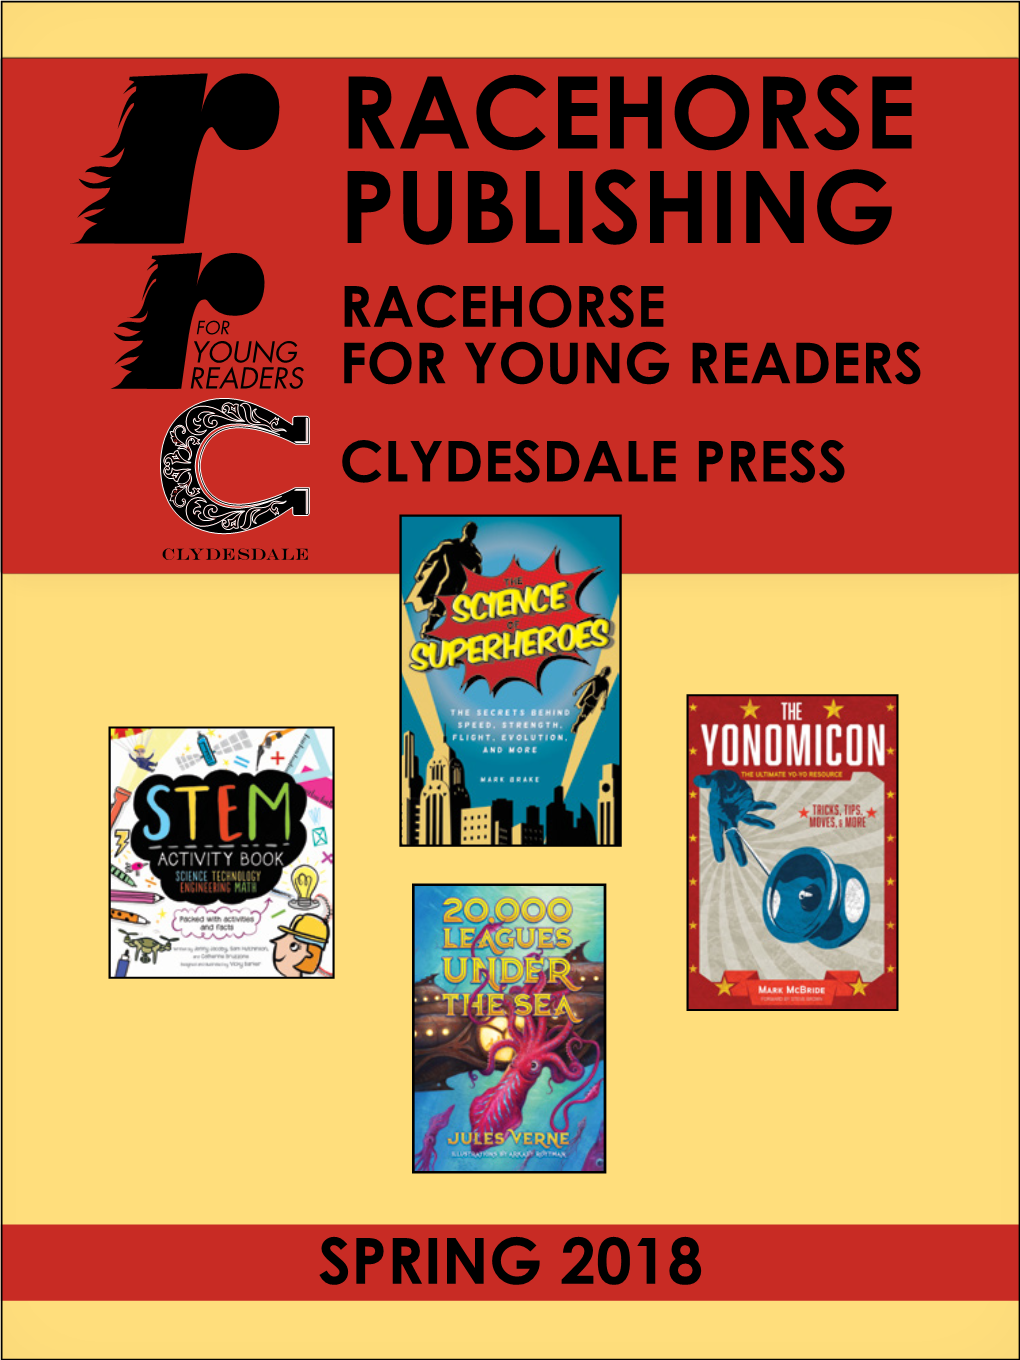 Racehorse Publishing Racehorse for Young Readers Clydesdale Press